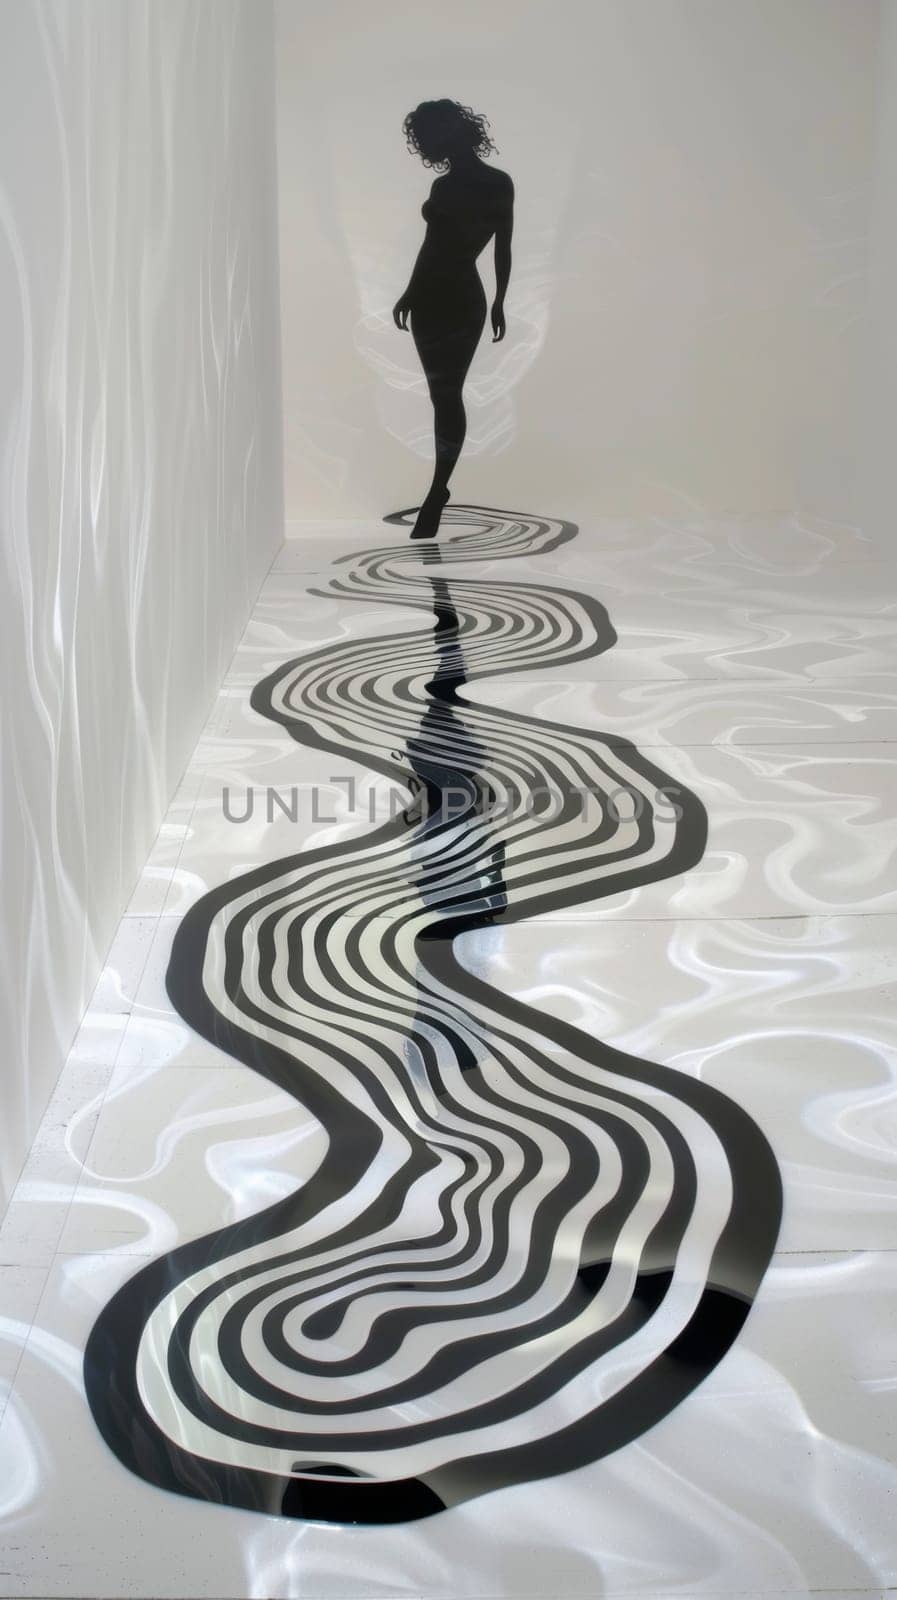 A woman walking on a black and white patterned floor, AI by starush